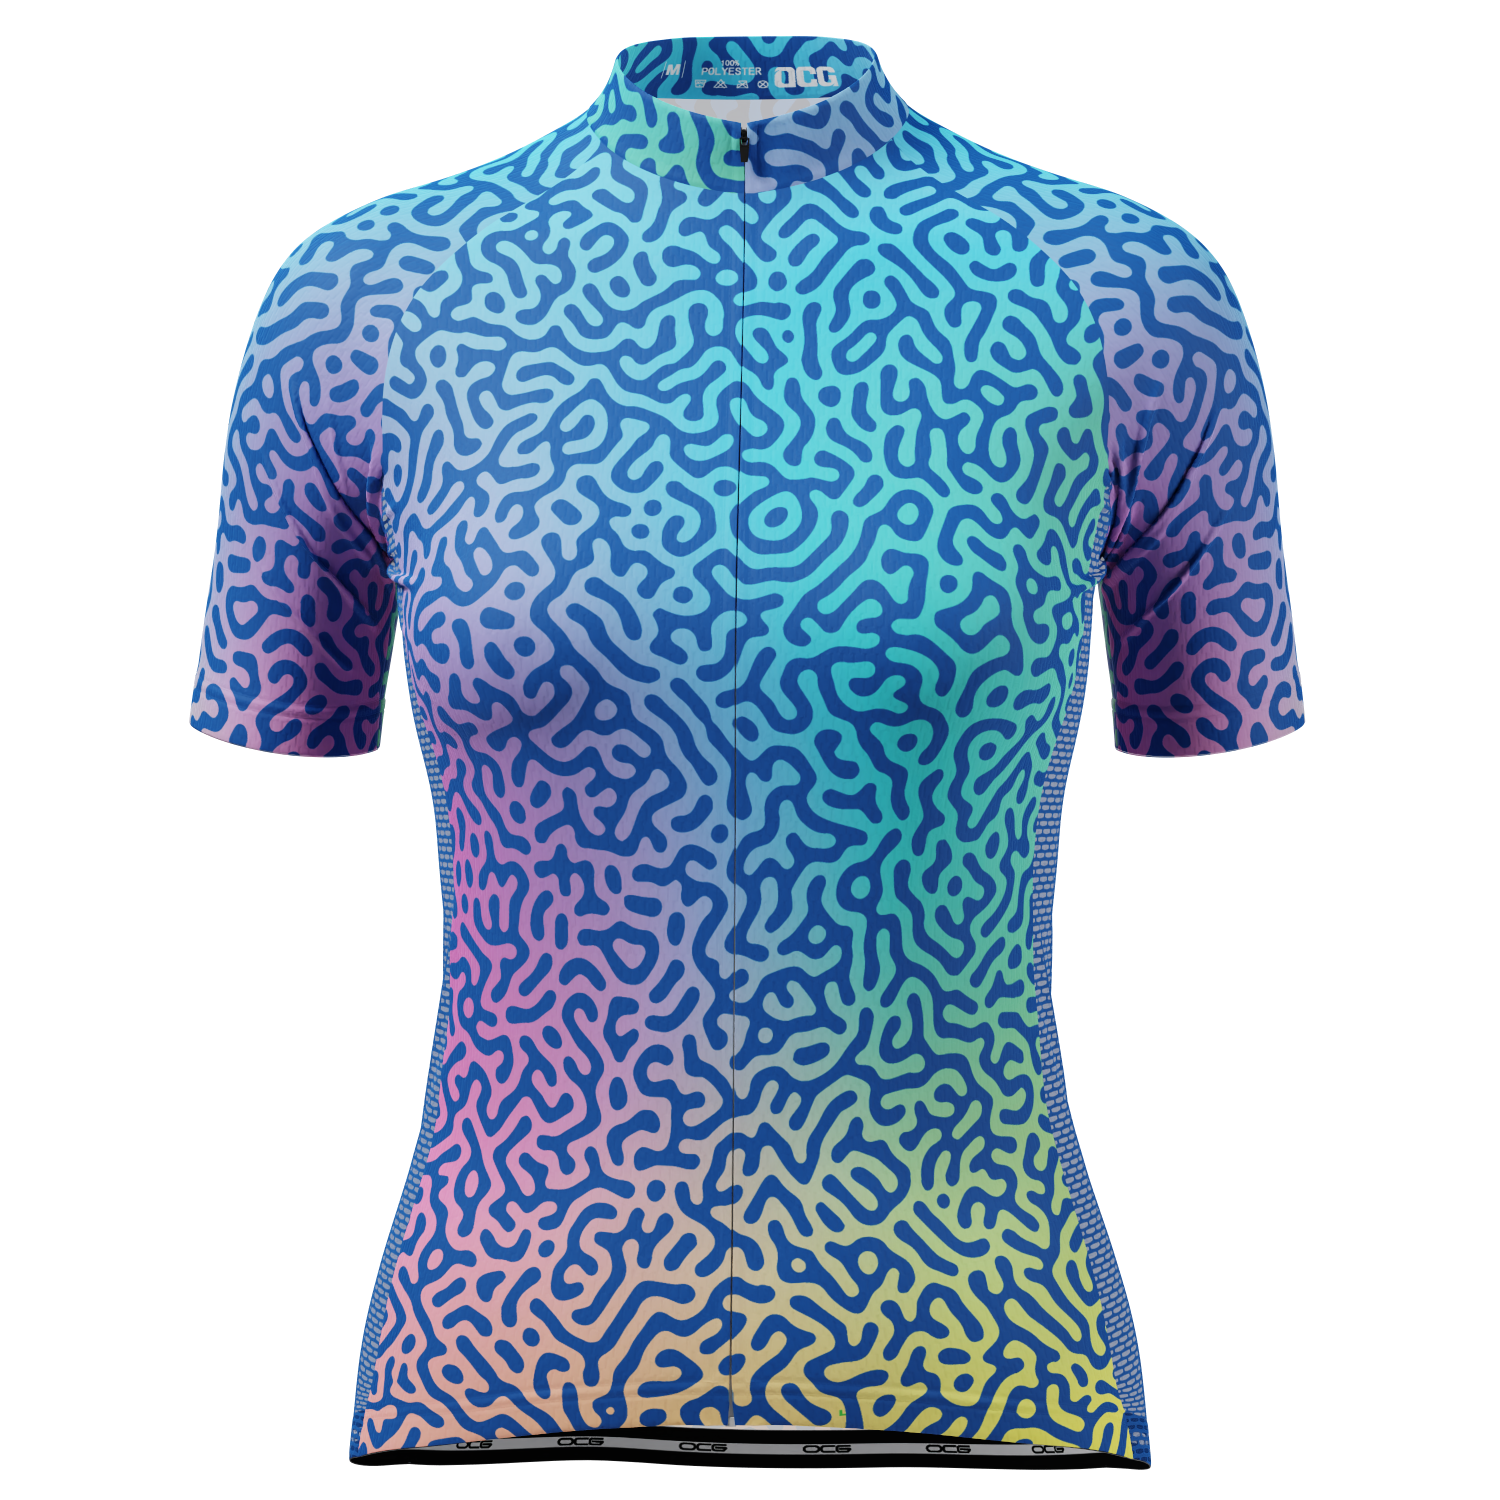 Women's Holographic Organic Lines Short Sleeve Cycling Jersey